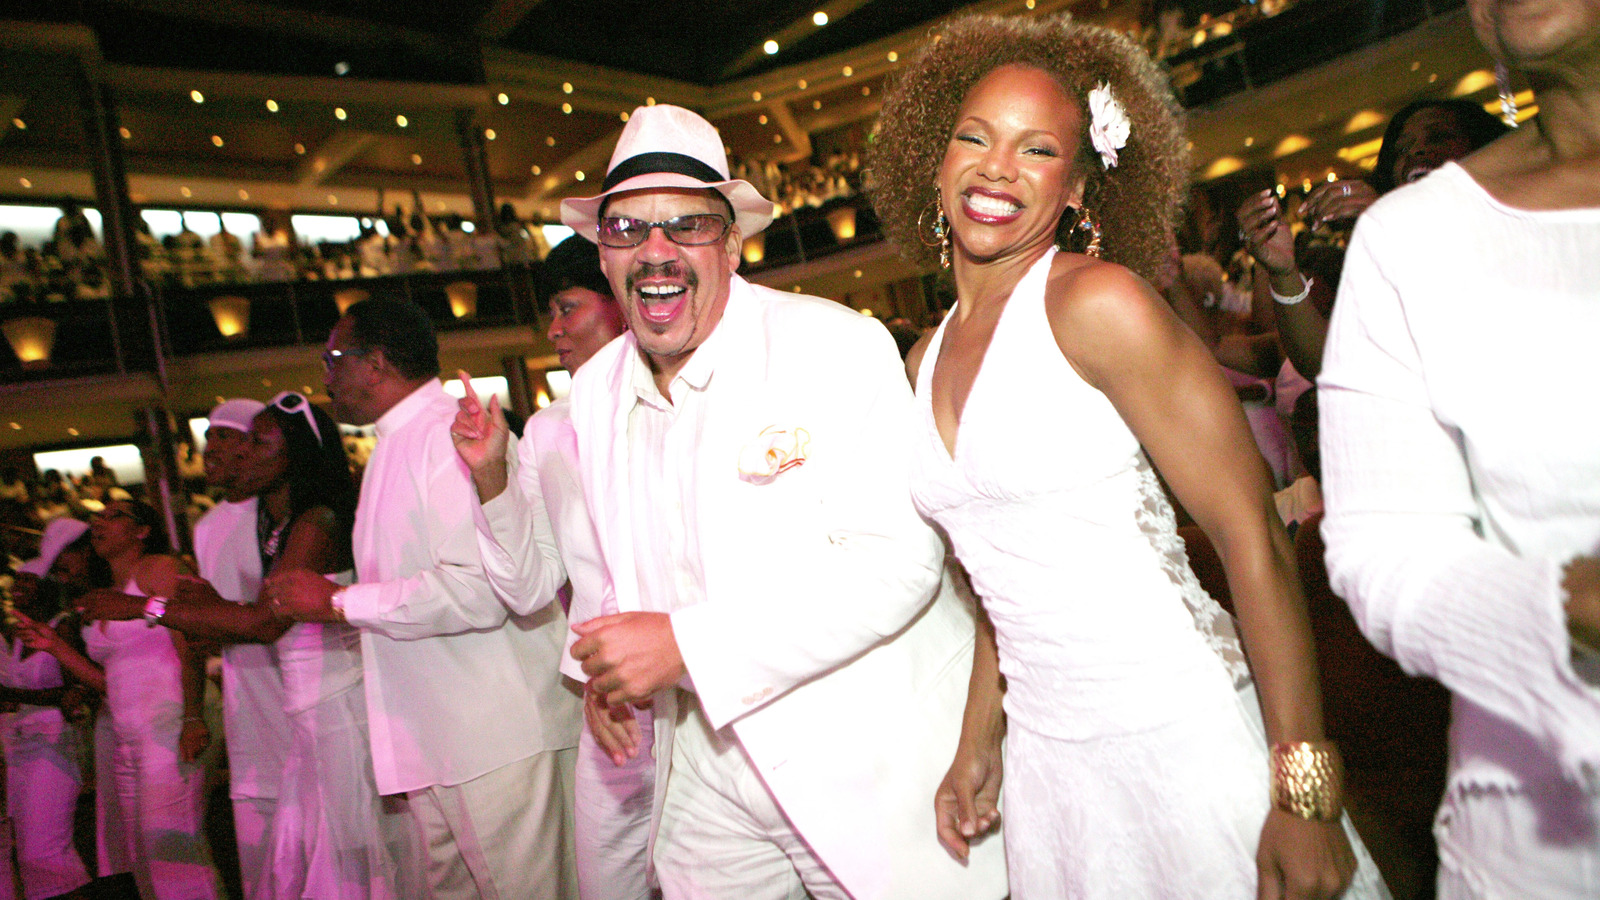 If You Want A Fun And Lively Party Cruise, Tom Joyner's Cruise Is The